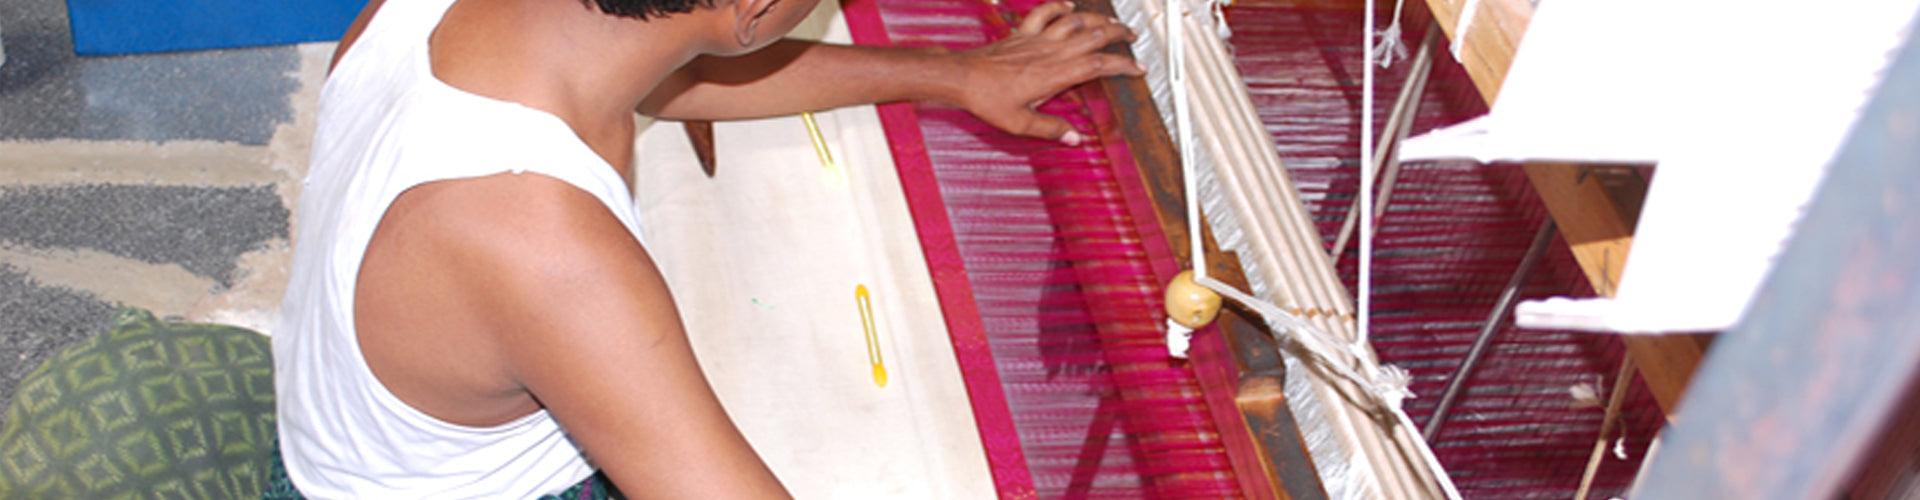 Dharmavaram sarees are typically made from high-quality silk